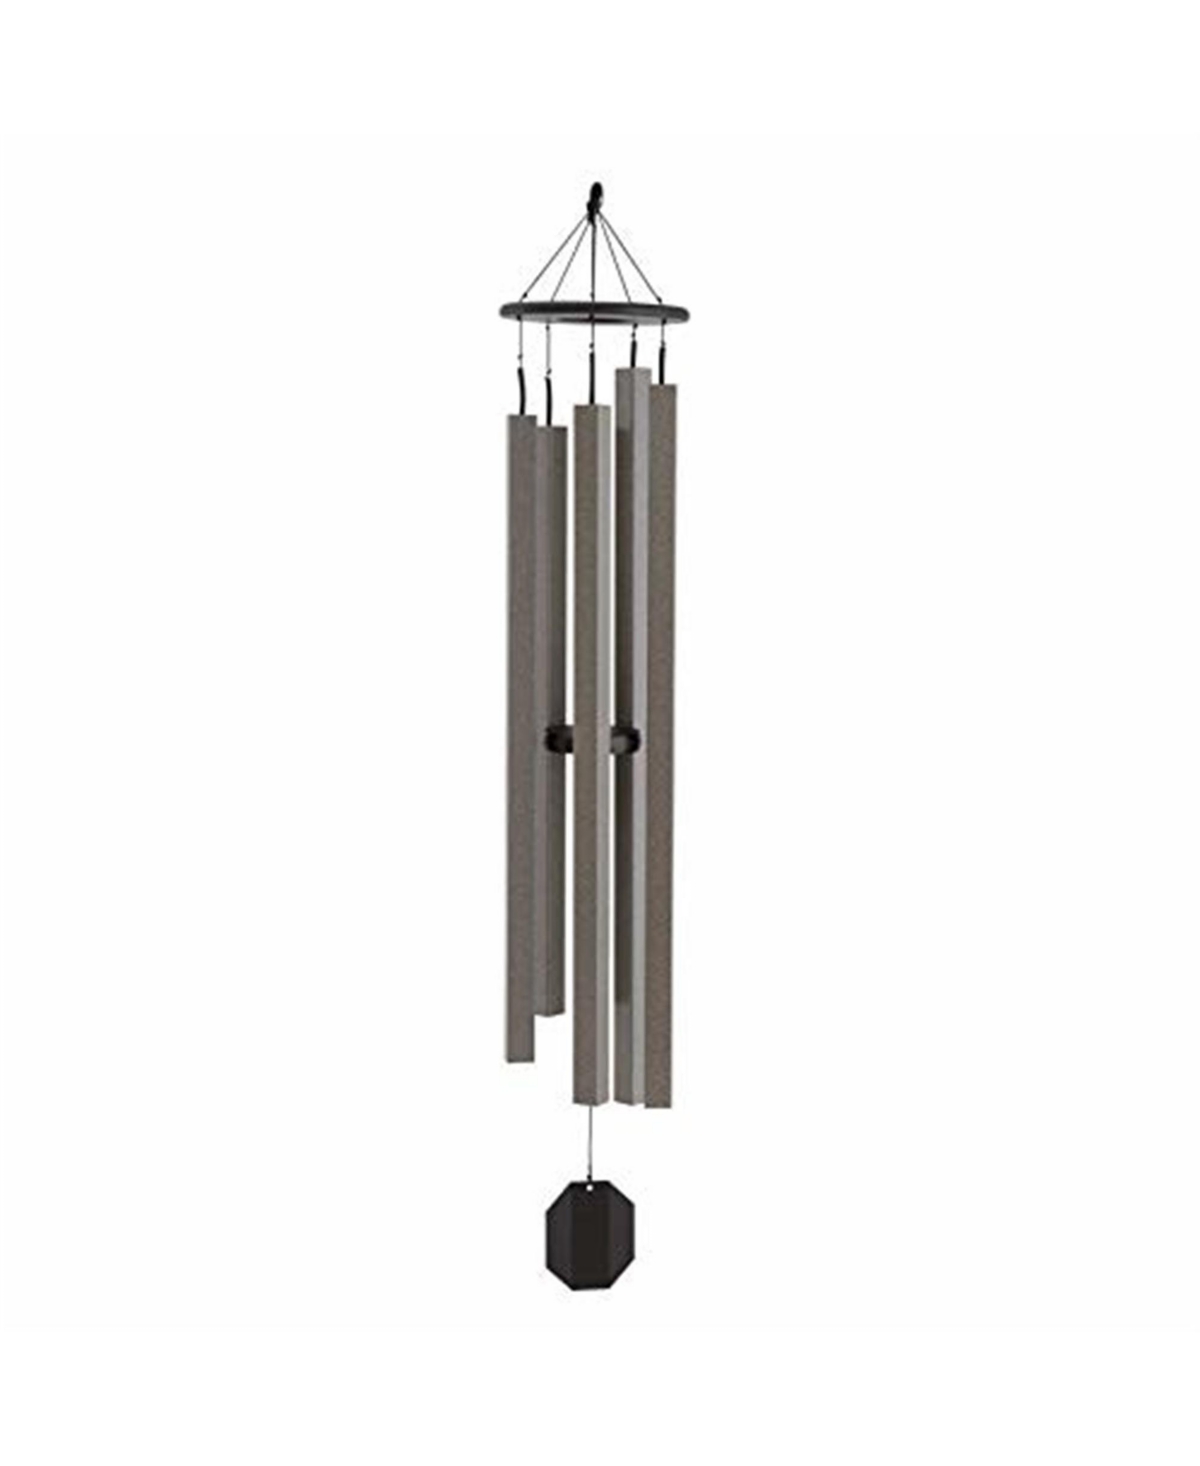 Music Wind Chime Amish Crafted Chime, 62in - Multi